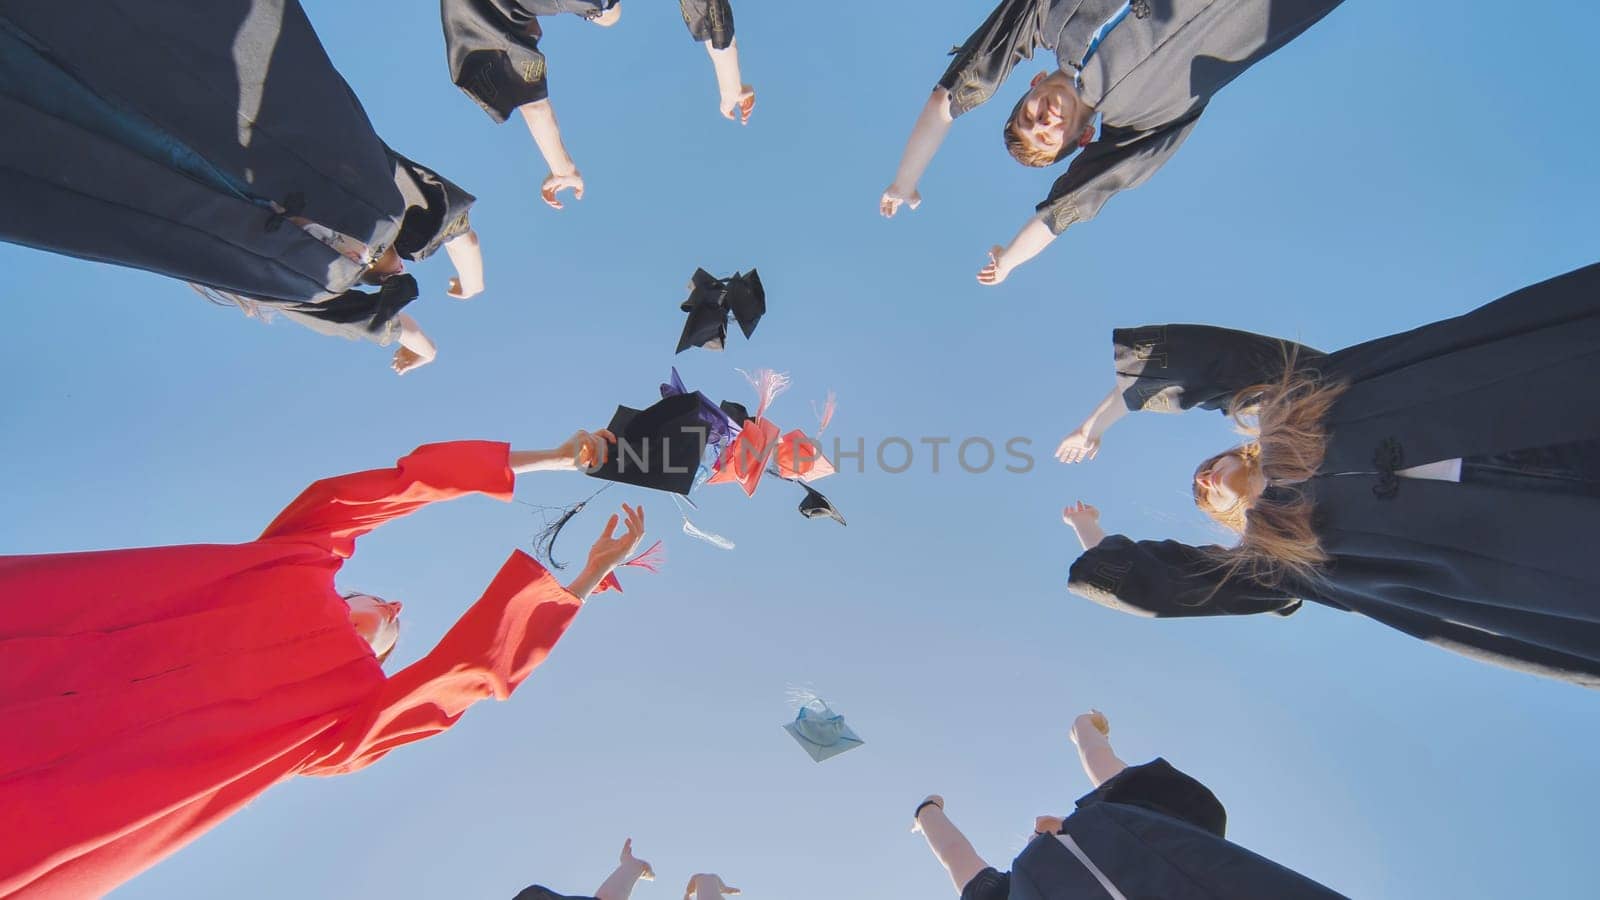 Graduates tossing multicolored hats against a blue sky